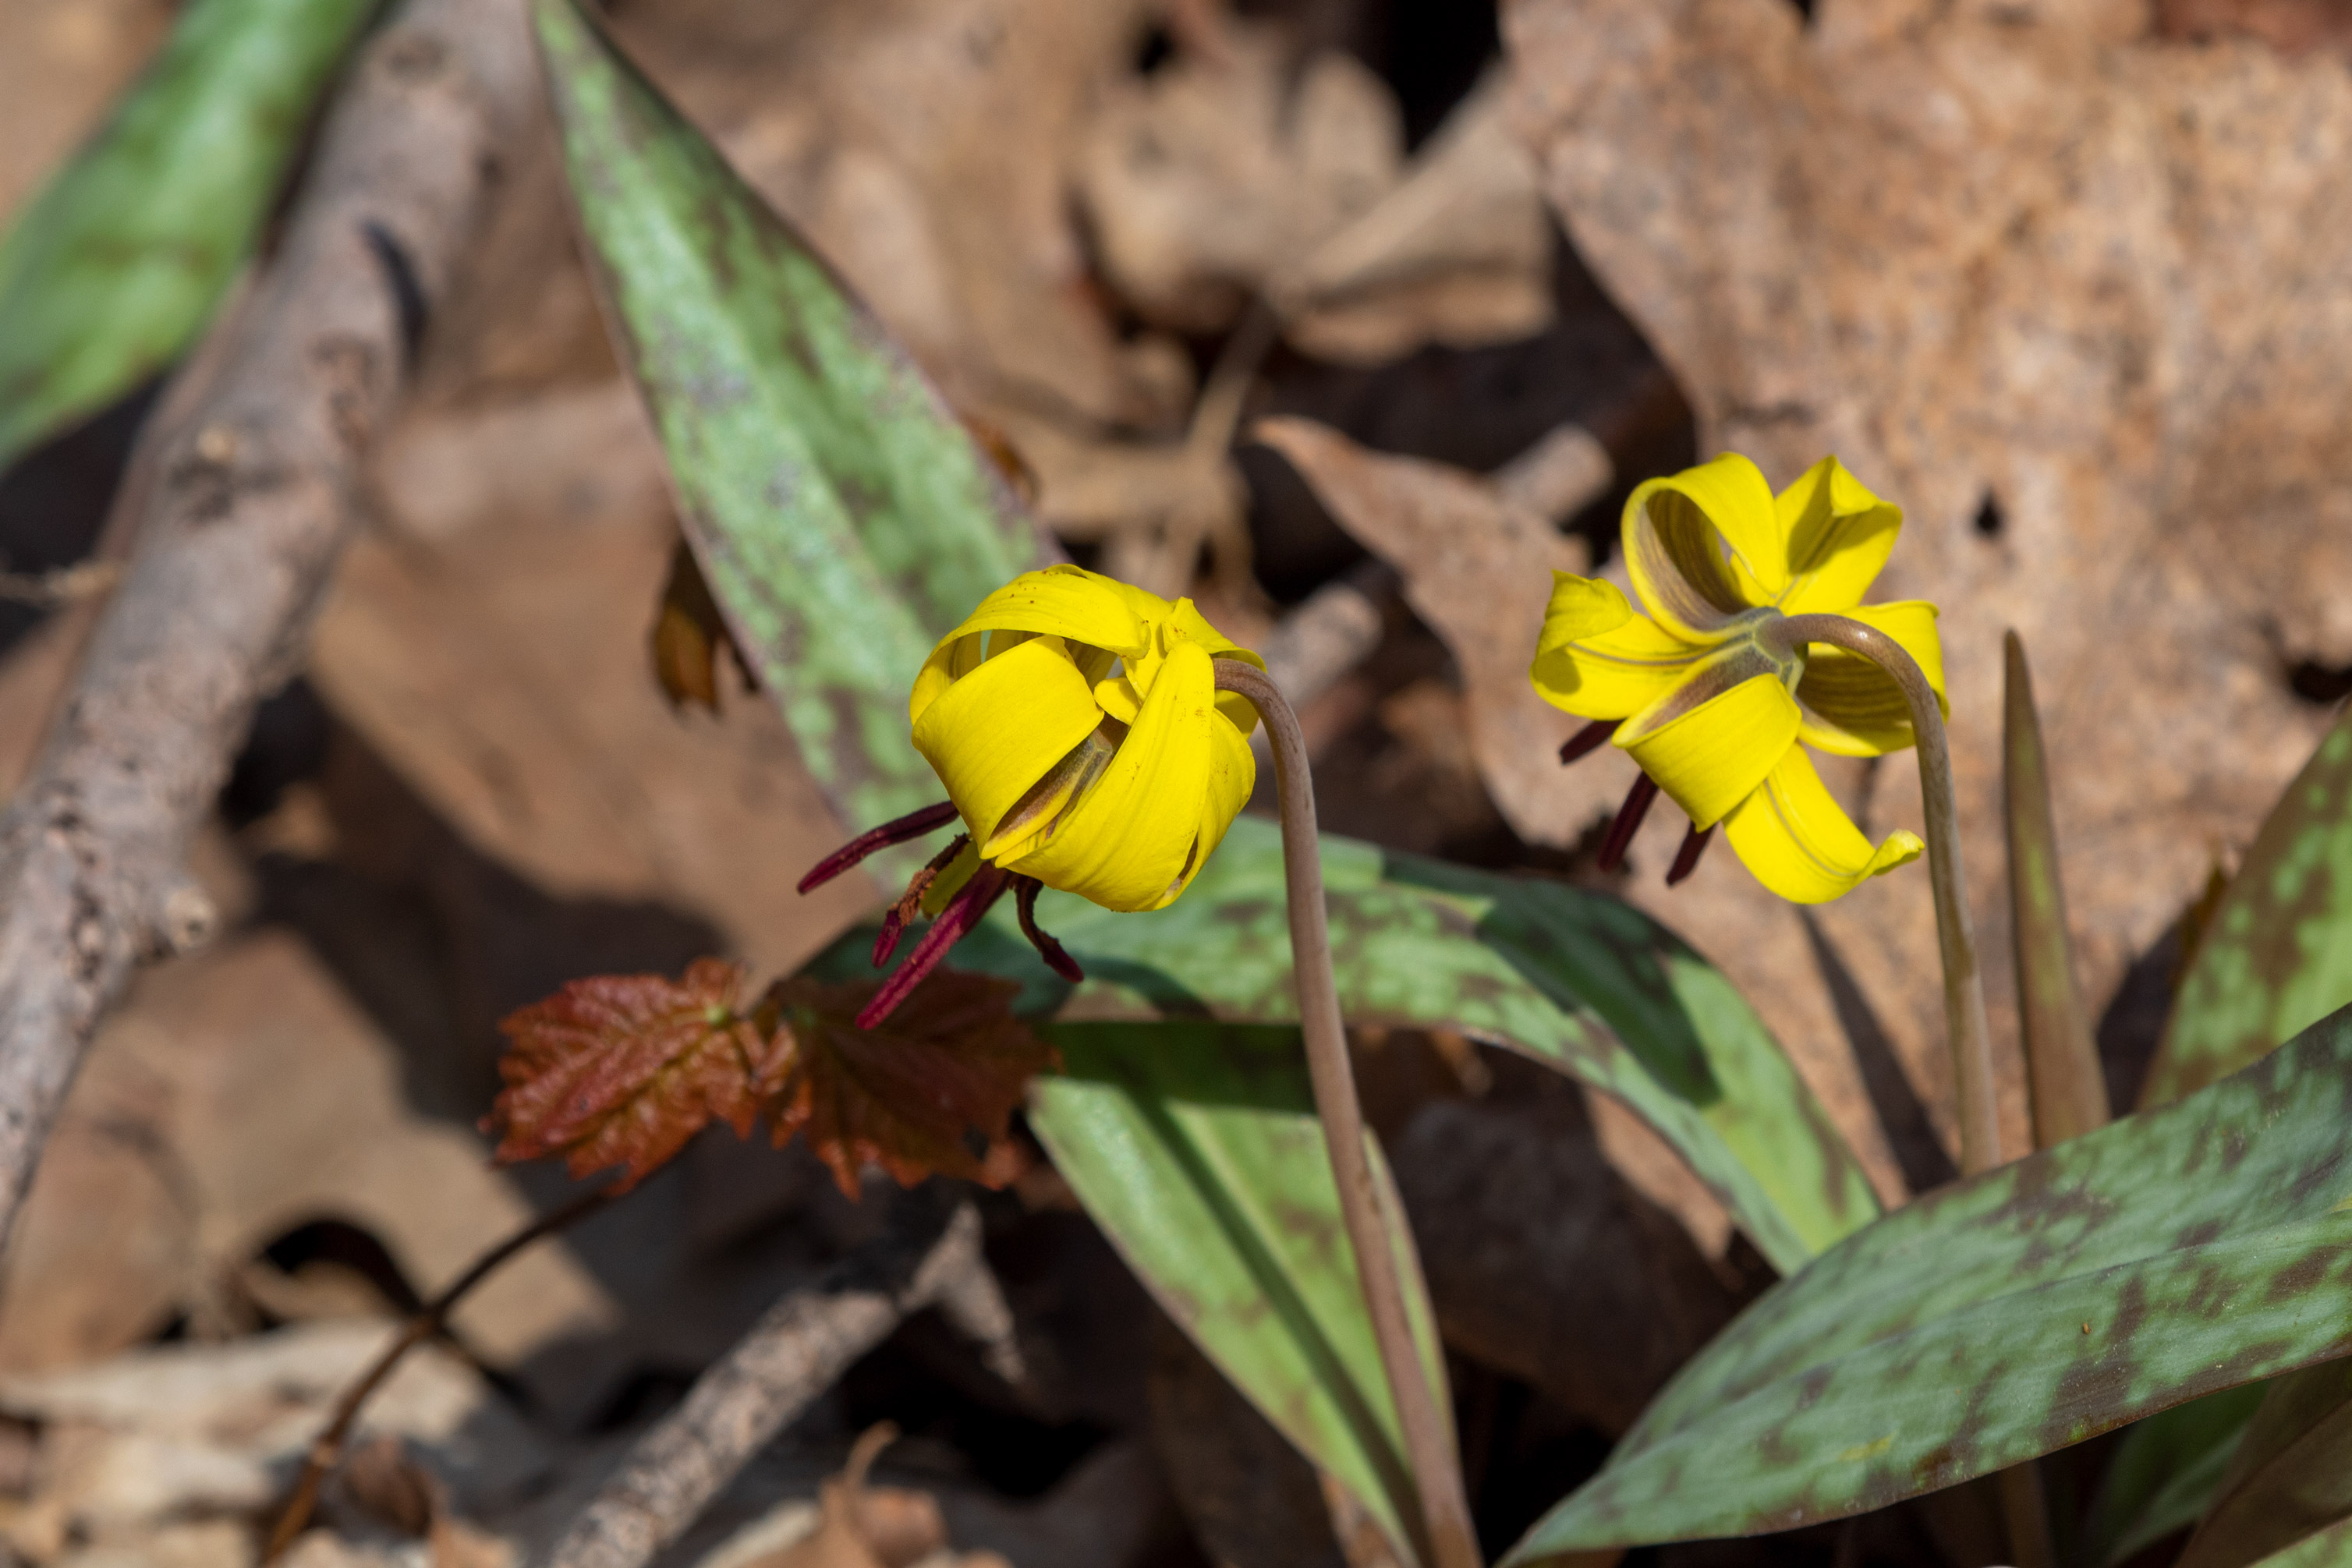 Two yellow flowers with curled petals and long green leaves growing on the forest ground